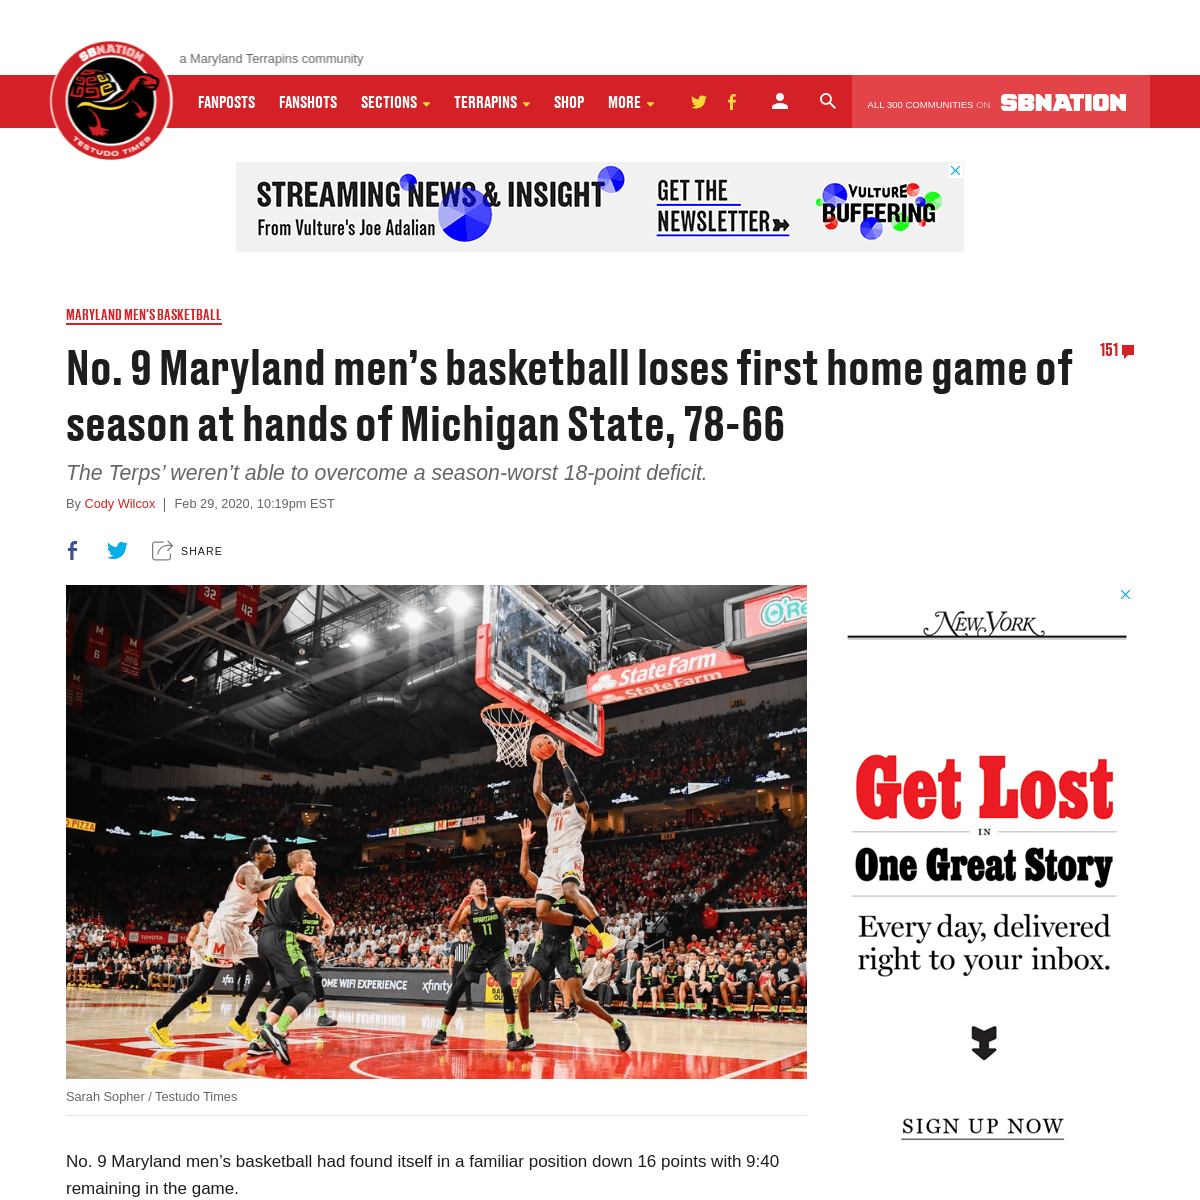 A complete backup of www.testudotimes.com/maryland-terps-basketball/2020/2/29/21159559/maryland-mens-basketball-michigan-state-b